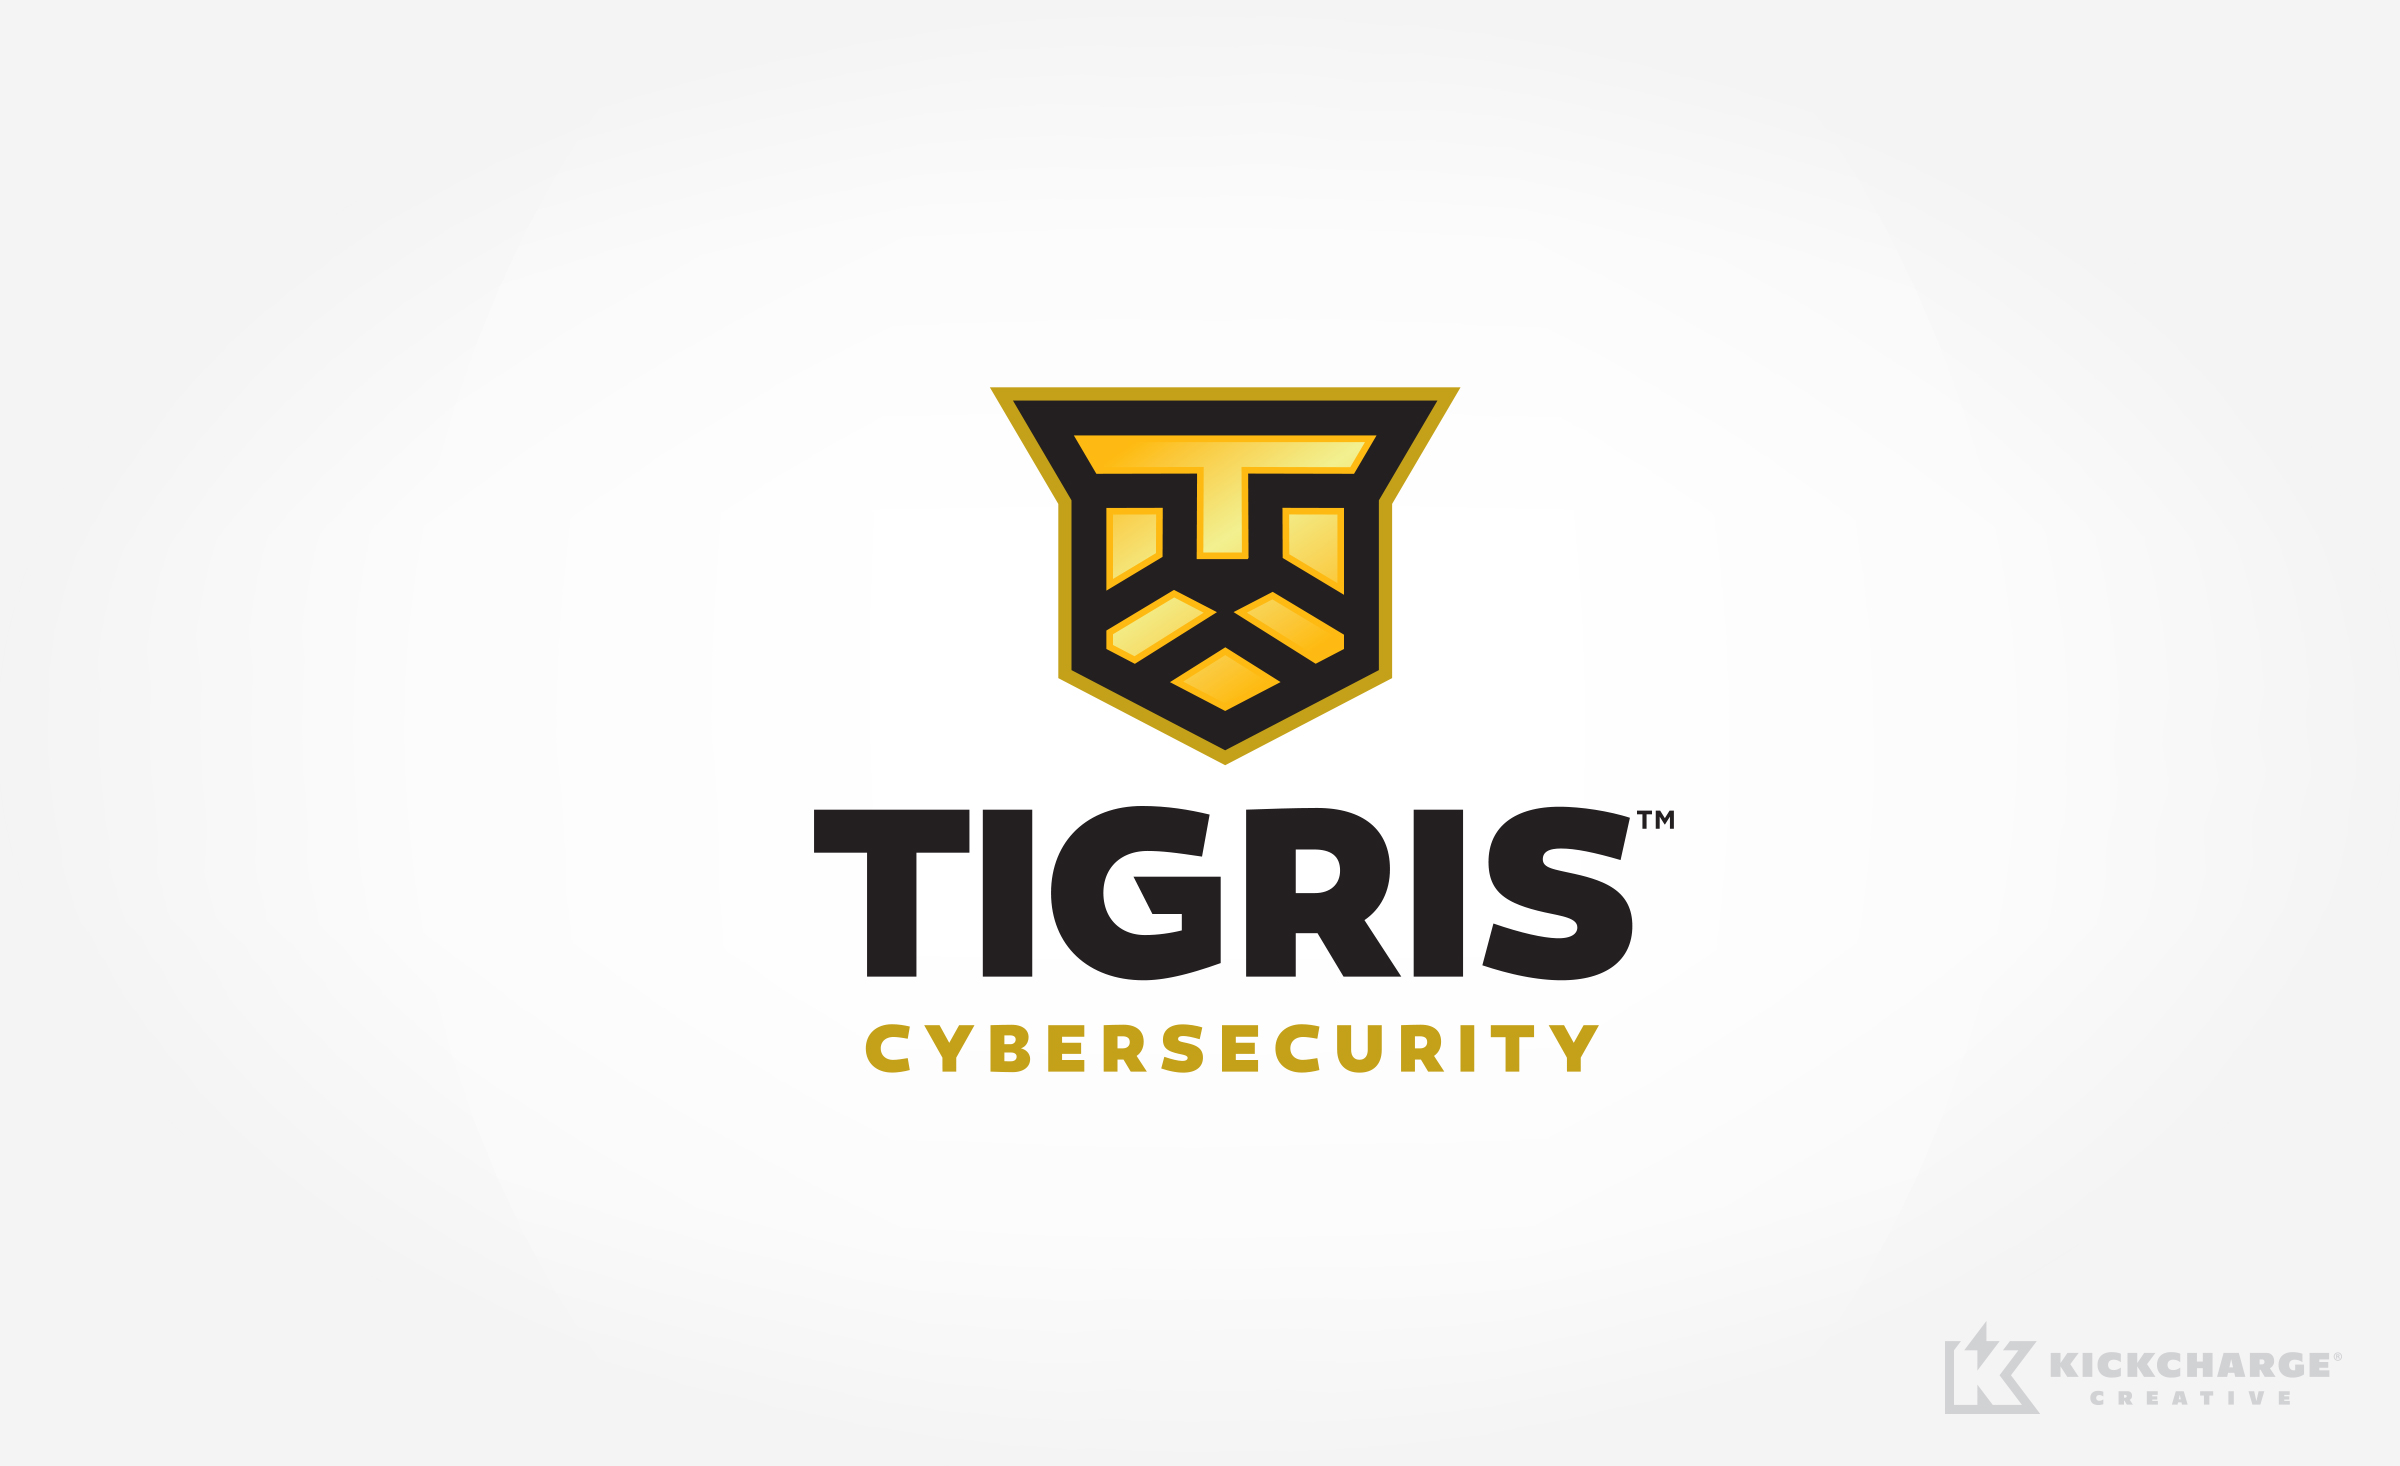 Tigris Cybersecurity